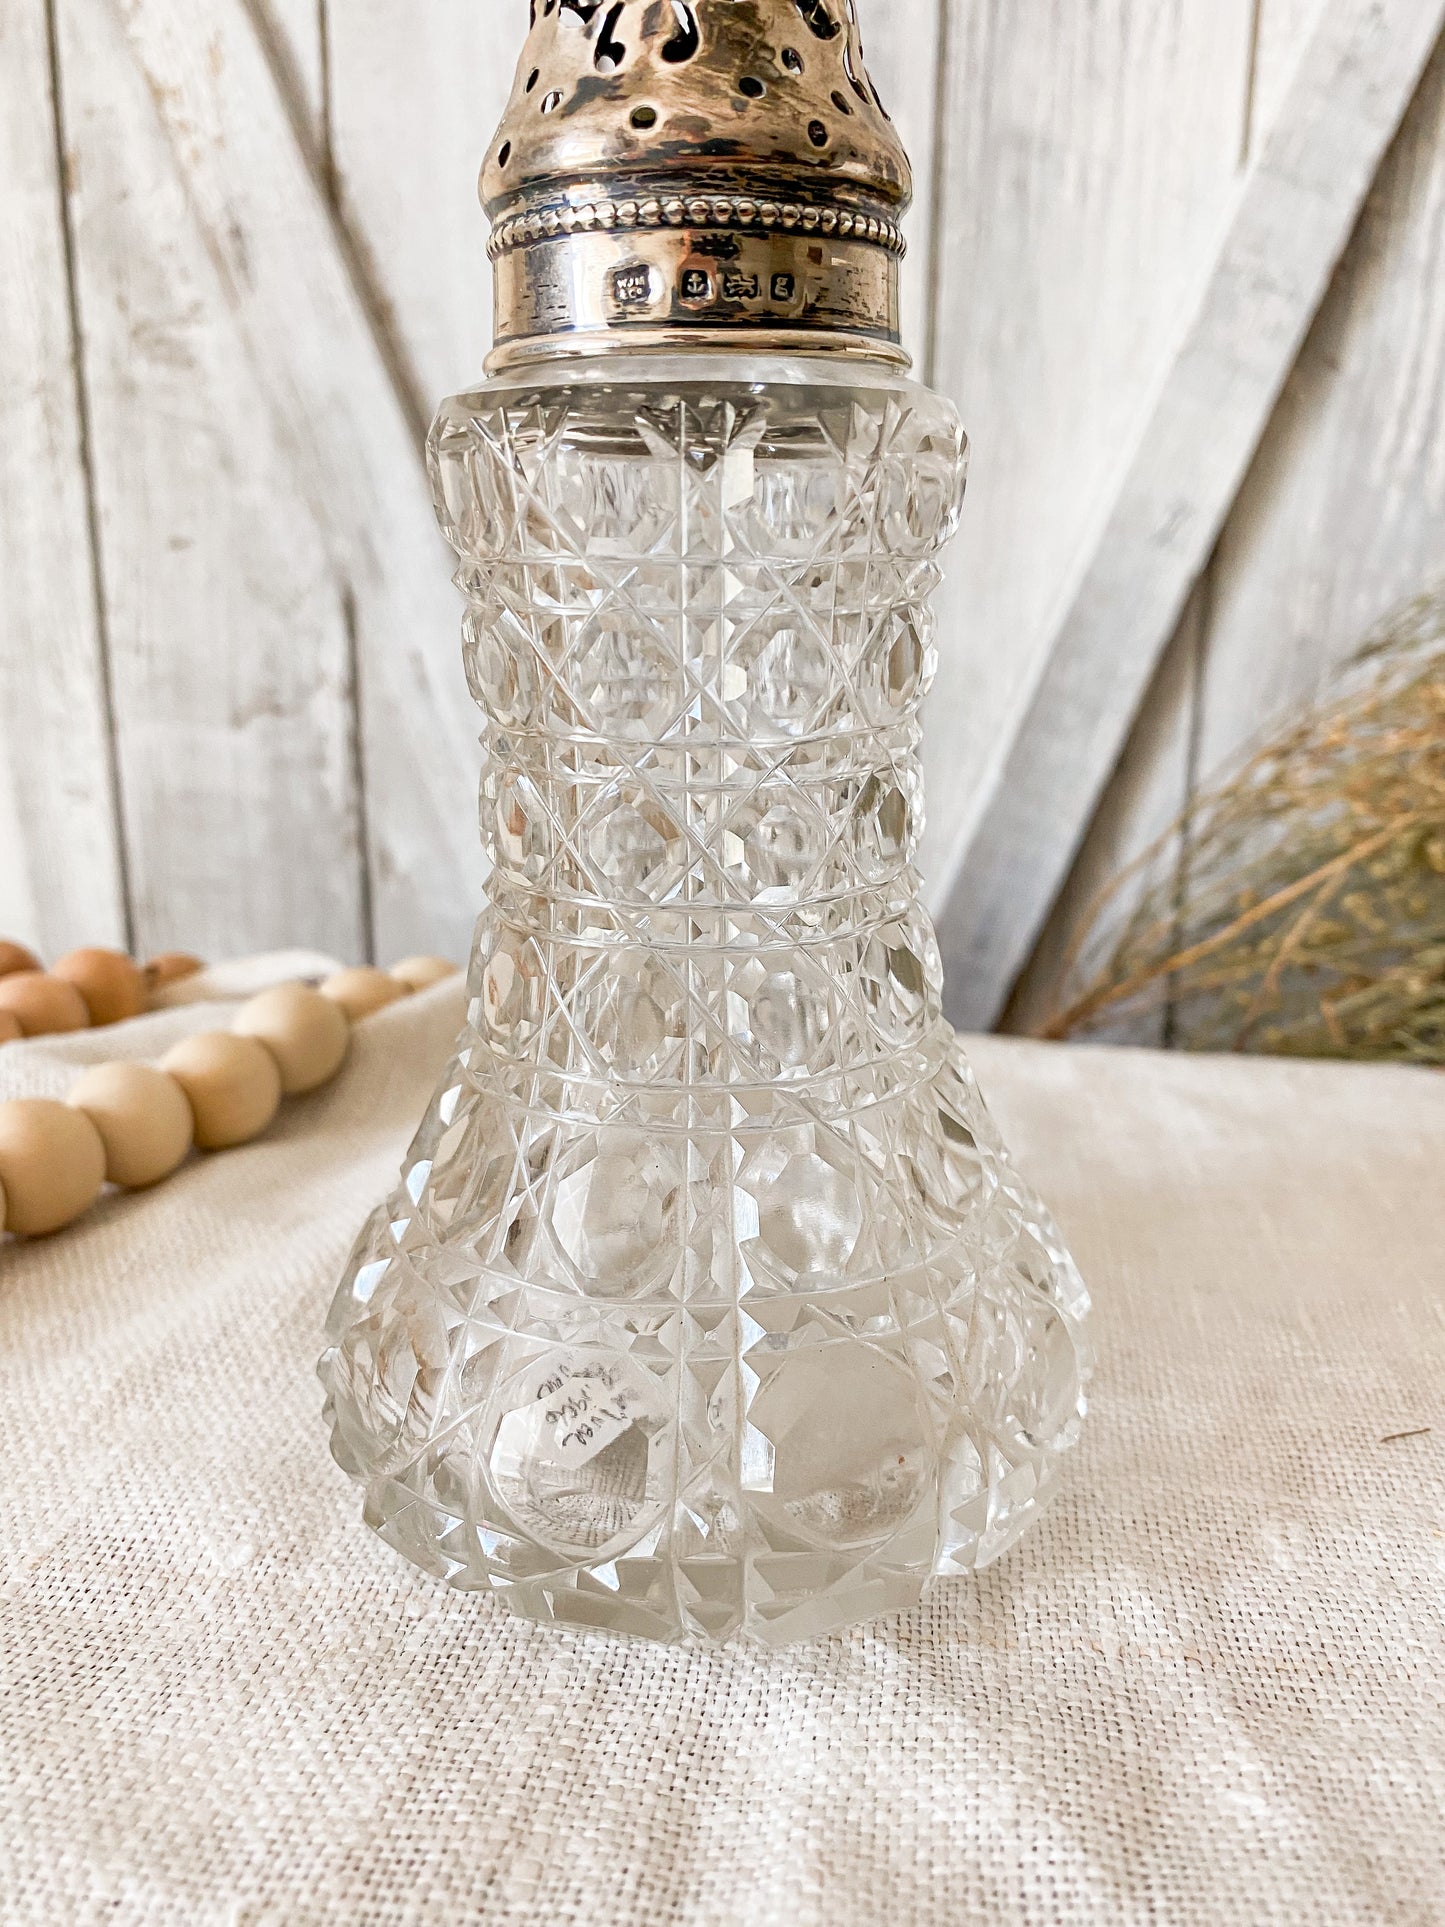 Antique English Cut Glass and Silverplate Sugar Caster Muffineer by William J. Myatt & Co, c1900